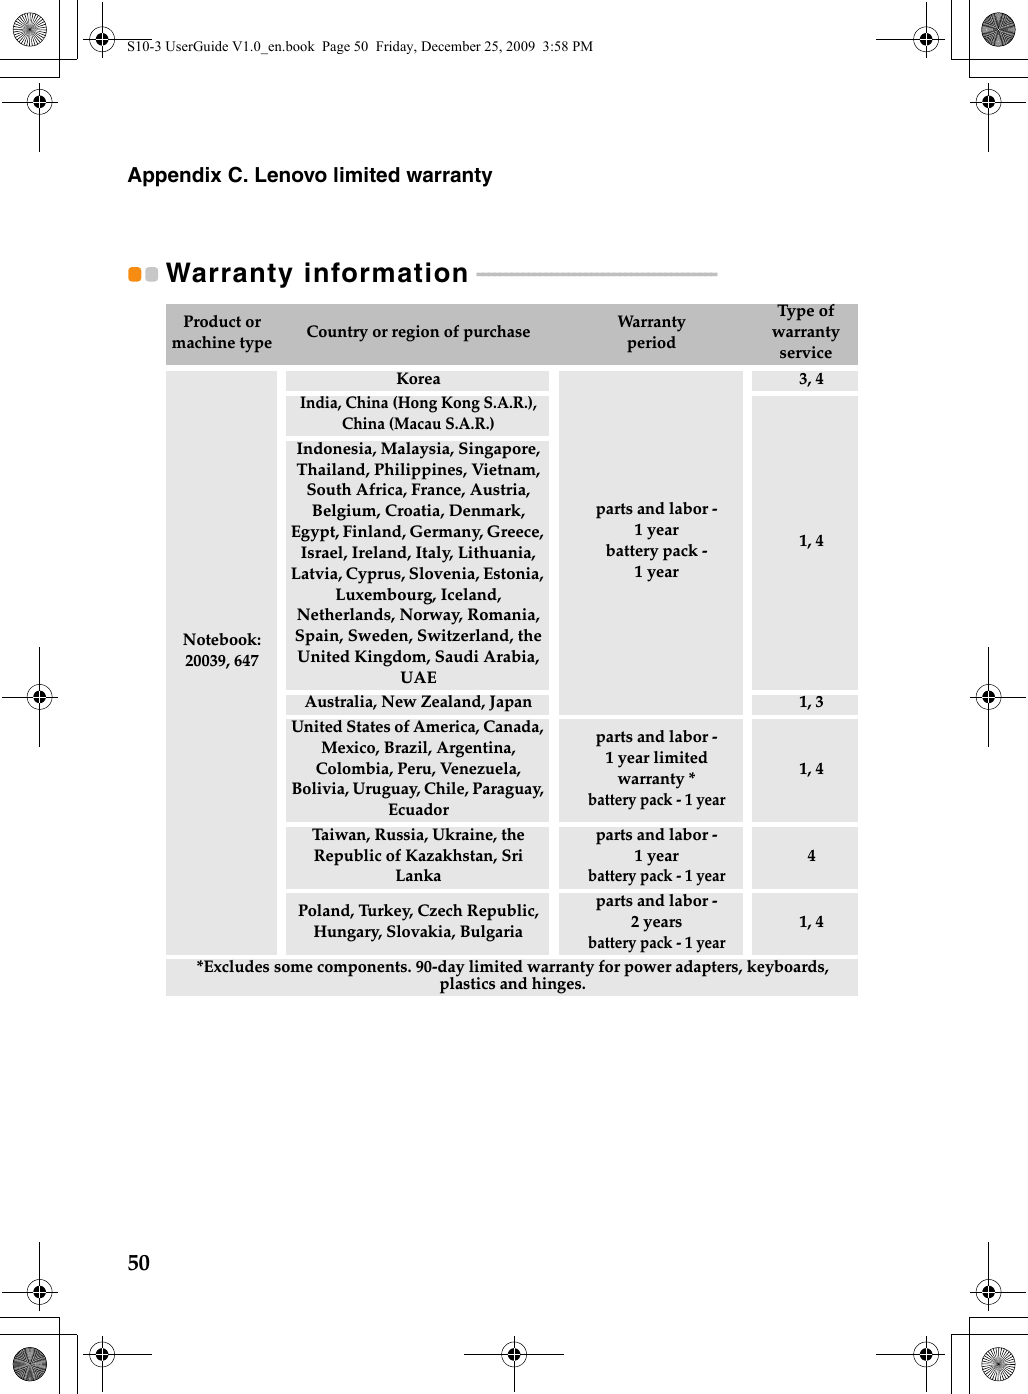 50Appendix C. Lenovo limited warrantyWarranty information - - - - - - - - - - - - - - - - - - - - - - - - - - - - - - - - - - - - - - - - - - Product or machine type Country or region of purchase WarrantyperiodType of warranty serviceNotebook:20039, 647Koreaparts and labor - 1 yearbattery pack - 1 year3, 4India, China (Hong Kong S.A.R.), China (Macau S.A.R.)1, 4Indonesia, Malaysia, Singapore, Thailand, Philippines, Vietnam, South Africa, France, Austria, Belgium, Croatia, Denmark, Egypt, Finland, Germany, Greece, Israel, Ireland, Italy, Lithuania, Latvia, Cyprus, Slovenia, Estonia, Luxembourg, Iceland, Netherlands, Norway, Romania, Spain, Sweden, Switzerland, the United Kingdom, Saudi Arabia, UAEAustralia, New Zealand, Japan 1, 3United States of America, Canada, Mexico, Brazil, Argentina, Colombia, Peru, Venezuela, Bolivia, Uruguay, Chile, Paraguay, Ecuadorparts and labor - 1 year limited warranty *battery pack - 1 year1, 4Taiwan, Russia, Ukraine, the Republic of Kazakhstan, Sri Lankaparts and labor - 1 yearbattery pack - 1 year4Poland, Turkey, Czech Republic, Hungary, Slovakia, Bulgariaparts and labor - 2 yearsbattery pack - 1 year1, 4*Excludes some components. 90-day limited warranty for power adapters, keyboards, plastics and hinges.S10-3 UserGuide V1.0_en.book  Page 50  Friday, December 25, 2009  3:58 PM